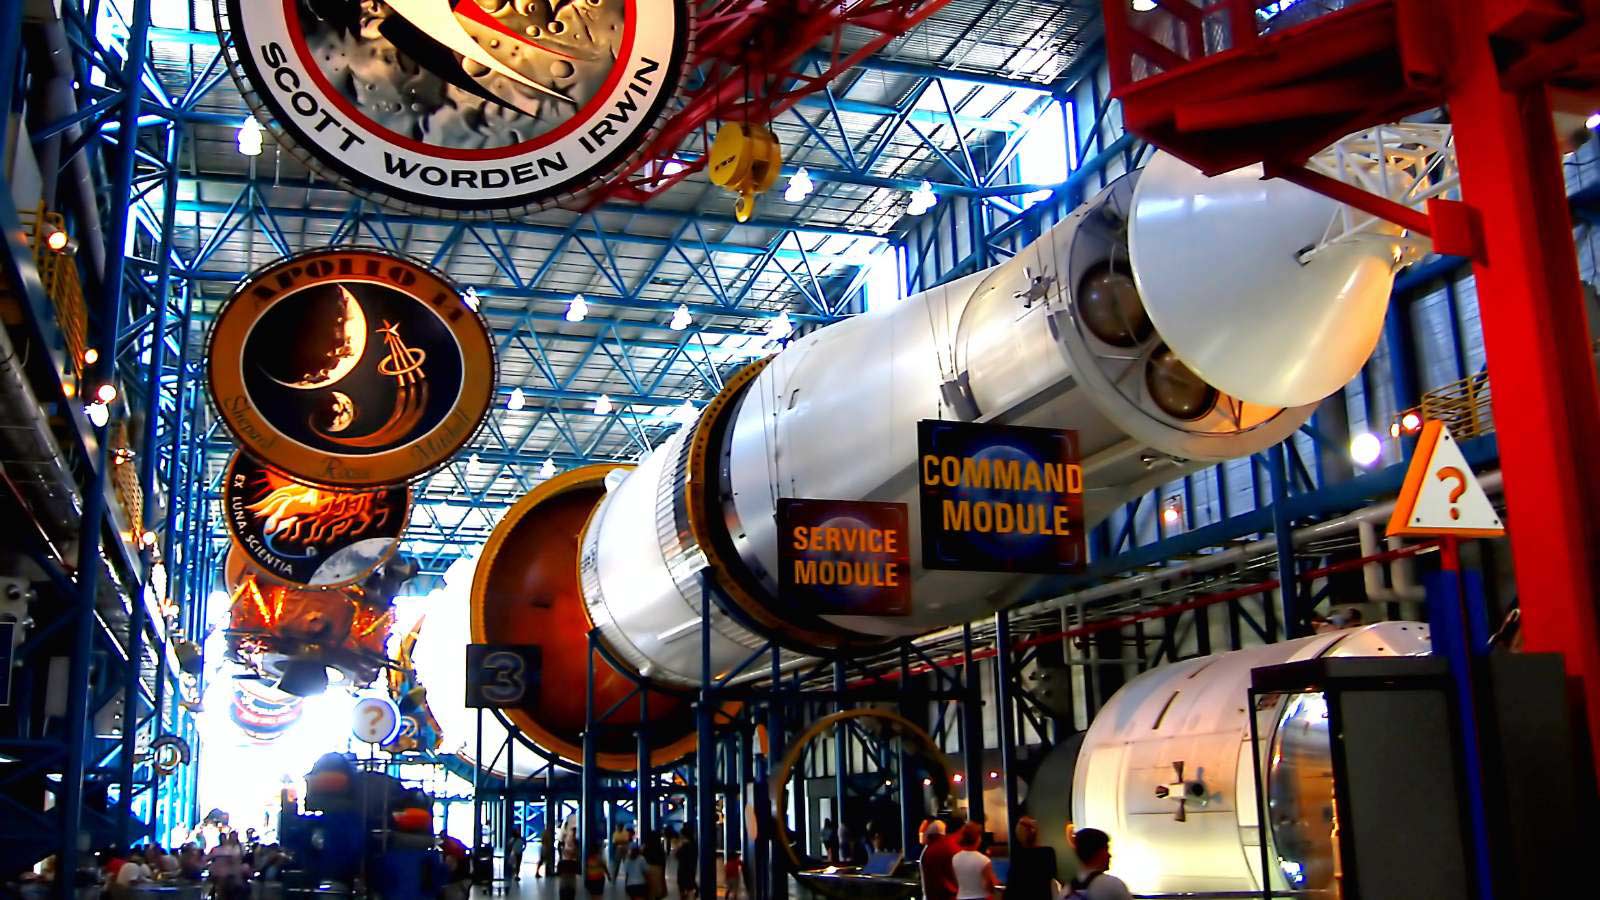 <p>The Kennedy Space Center is the launch site for NASA’s space shuttle program and is a must-see for anyone interested in space exploration.</p>